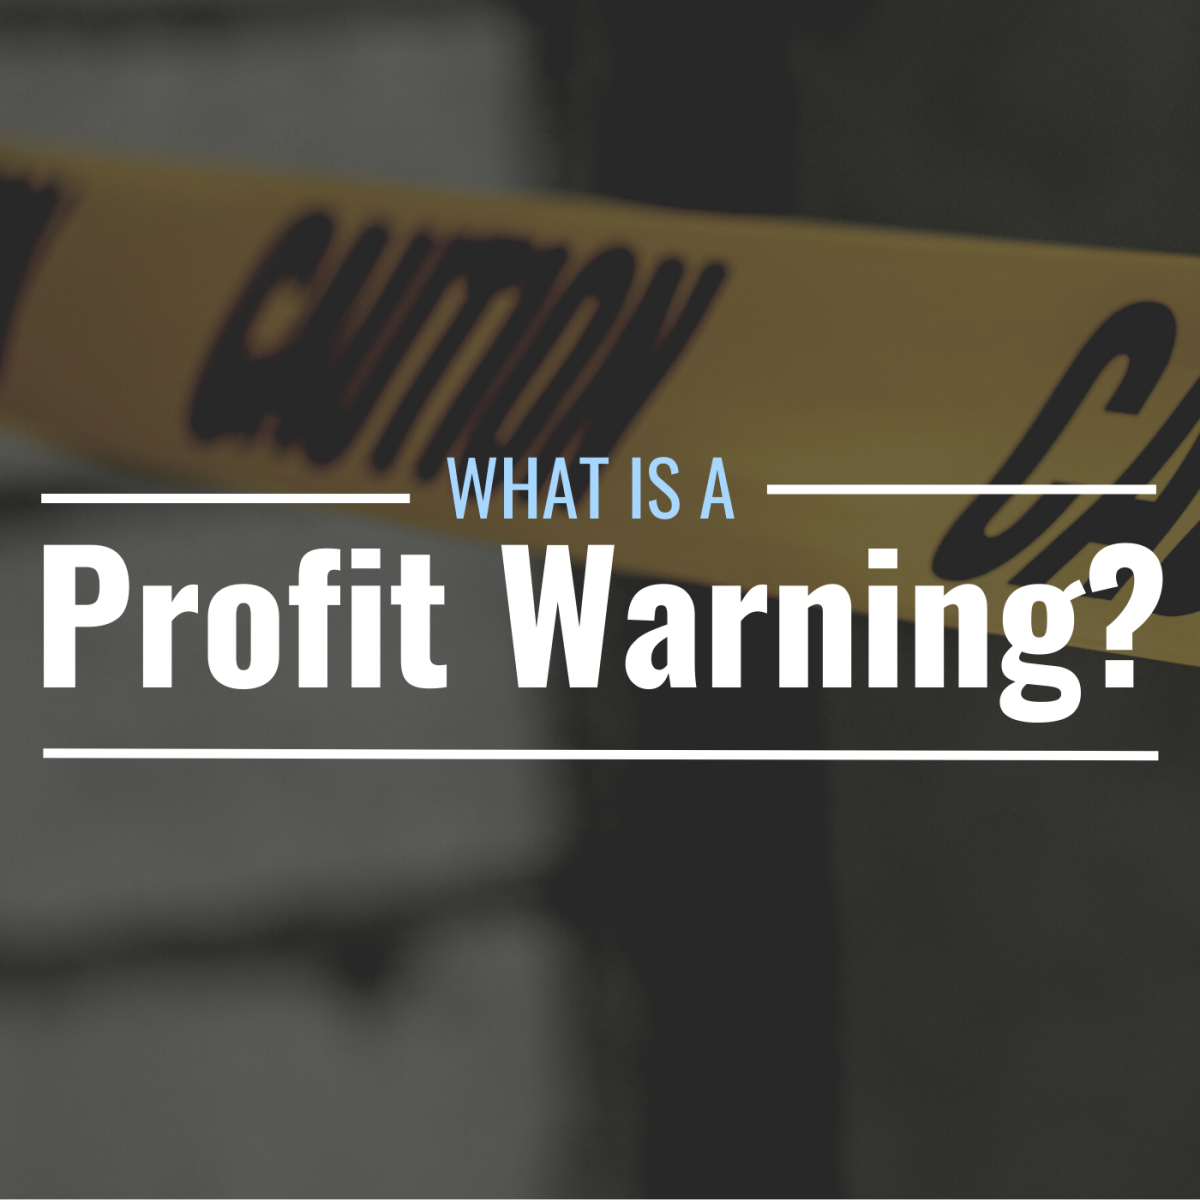 Photo of caution tape with text overlay that reads "What Is a Profit Warning?"